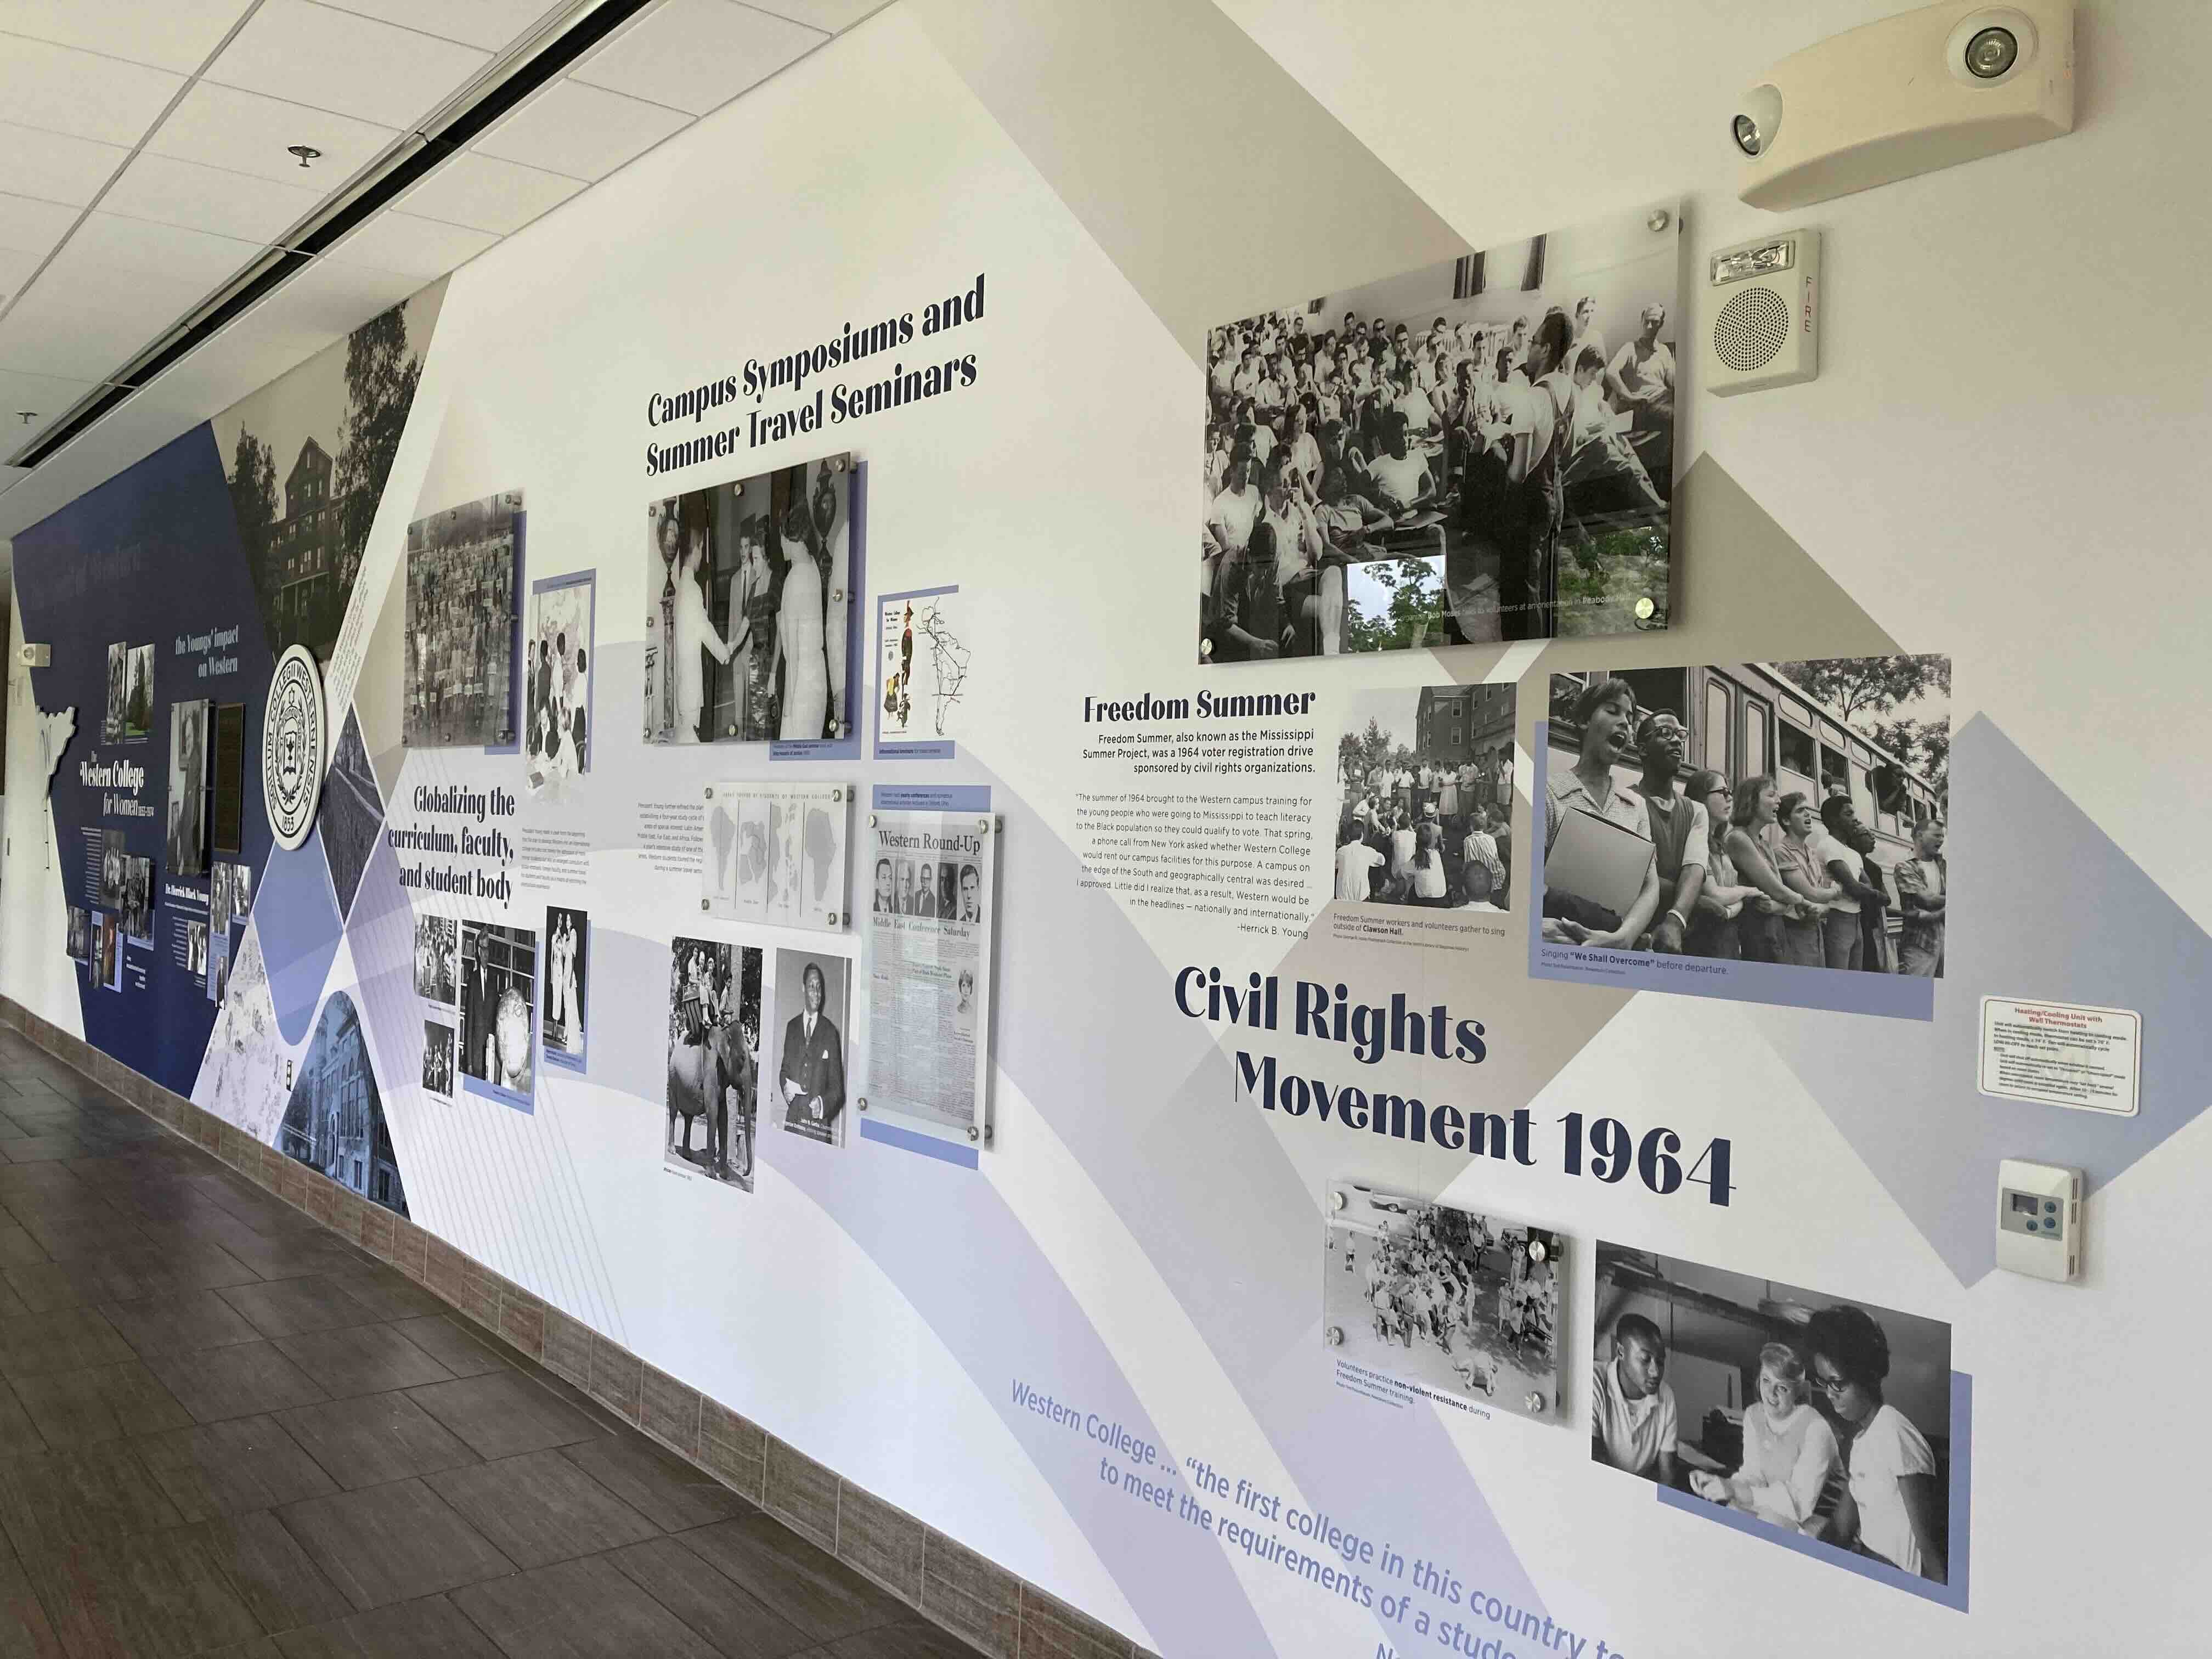 This portion of the wall looks at the roll that Western College played in the civil rights movement and Freedom Summer 1964.